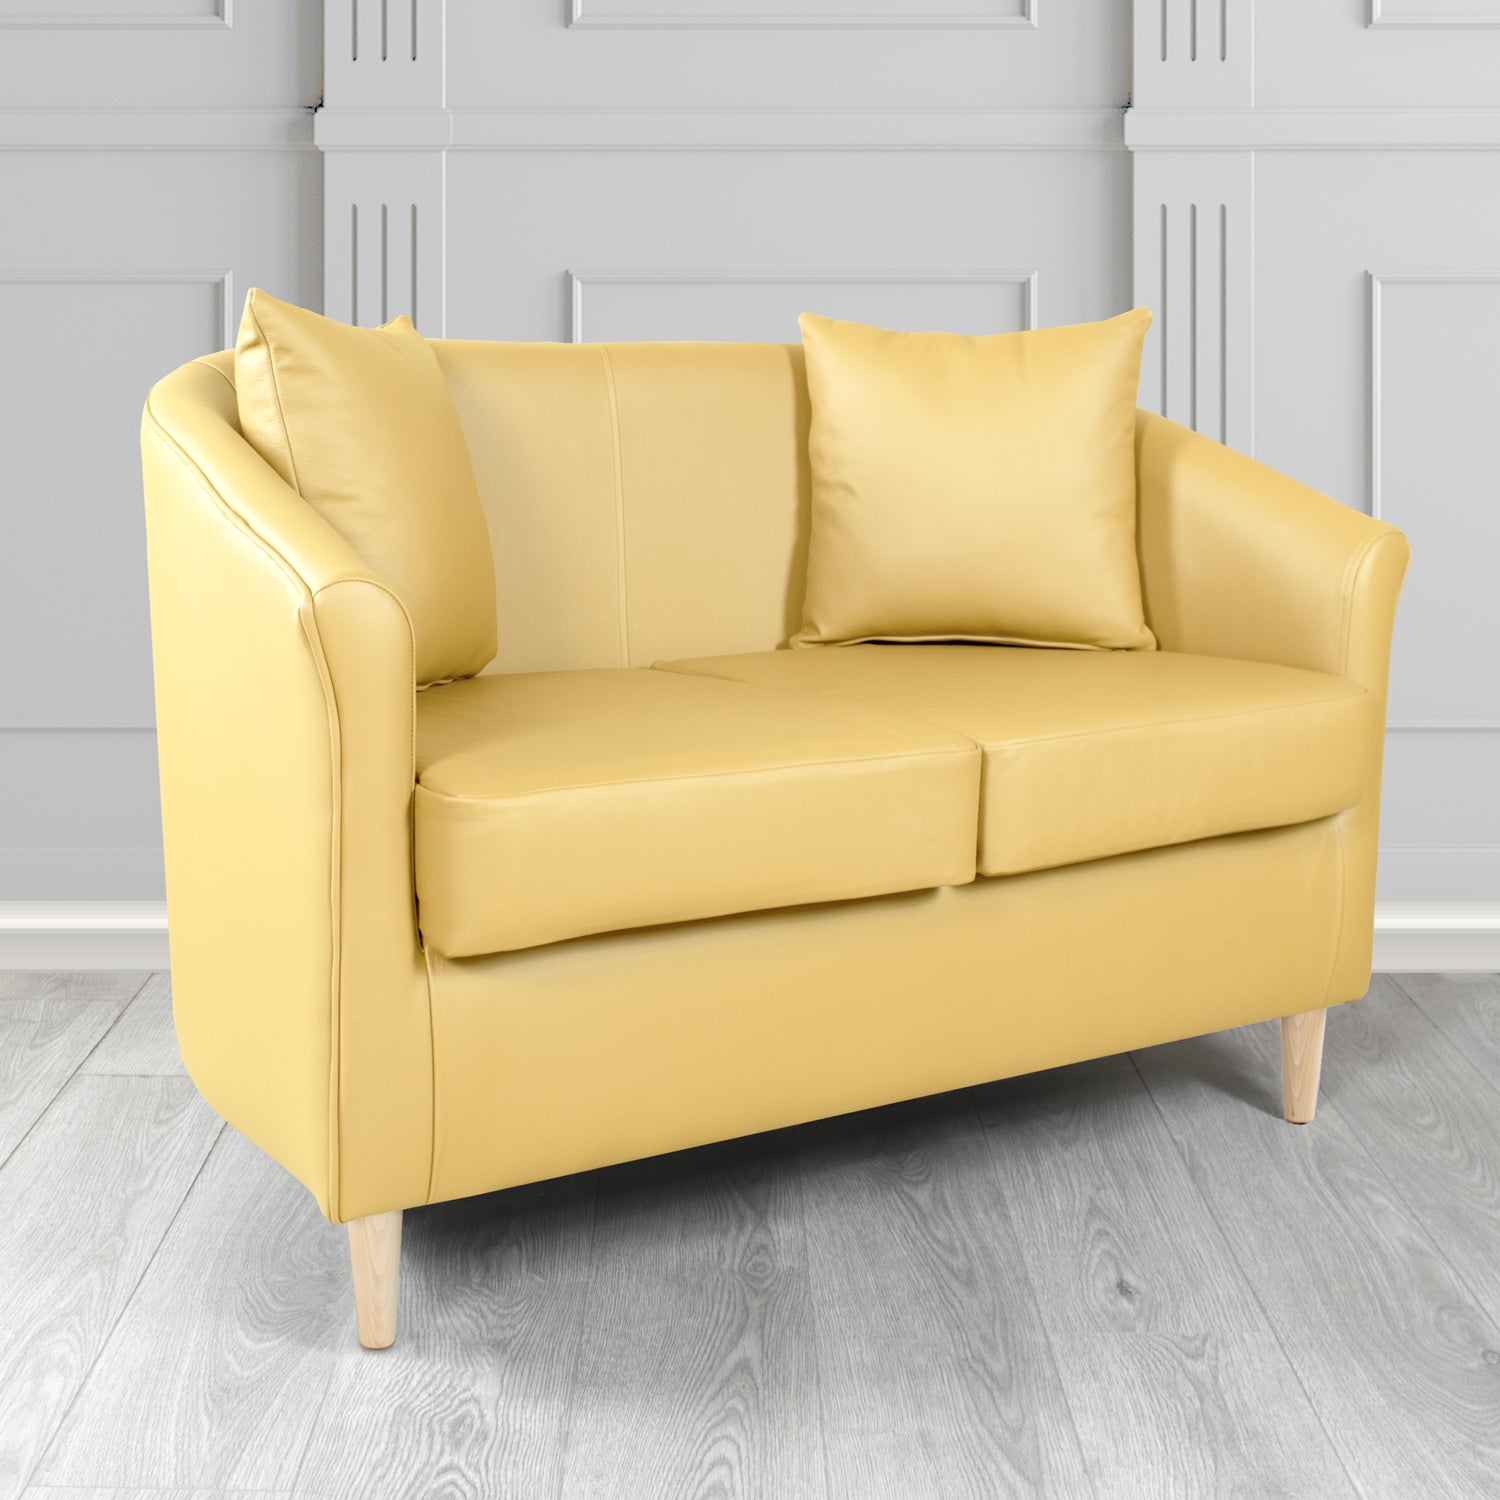 St Tropez Shelly Angel Crib 5 Genuine Leather 2 Seater Tub Sofa with Scatter Cushions - The Tub Chair Shop